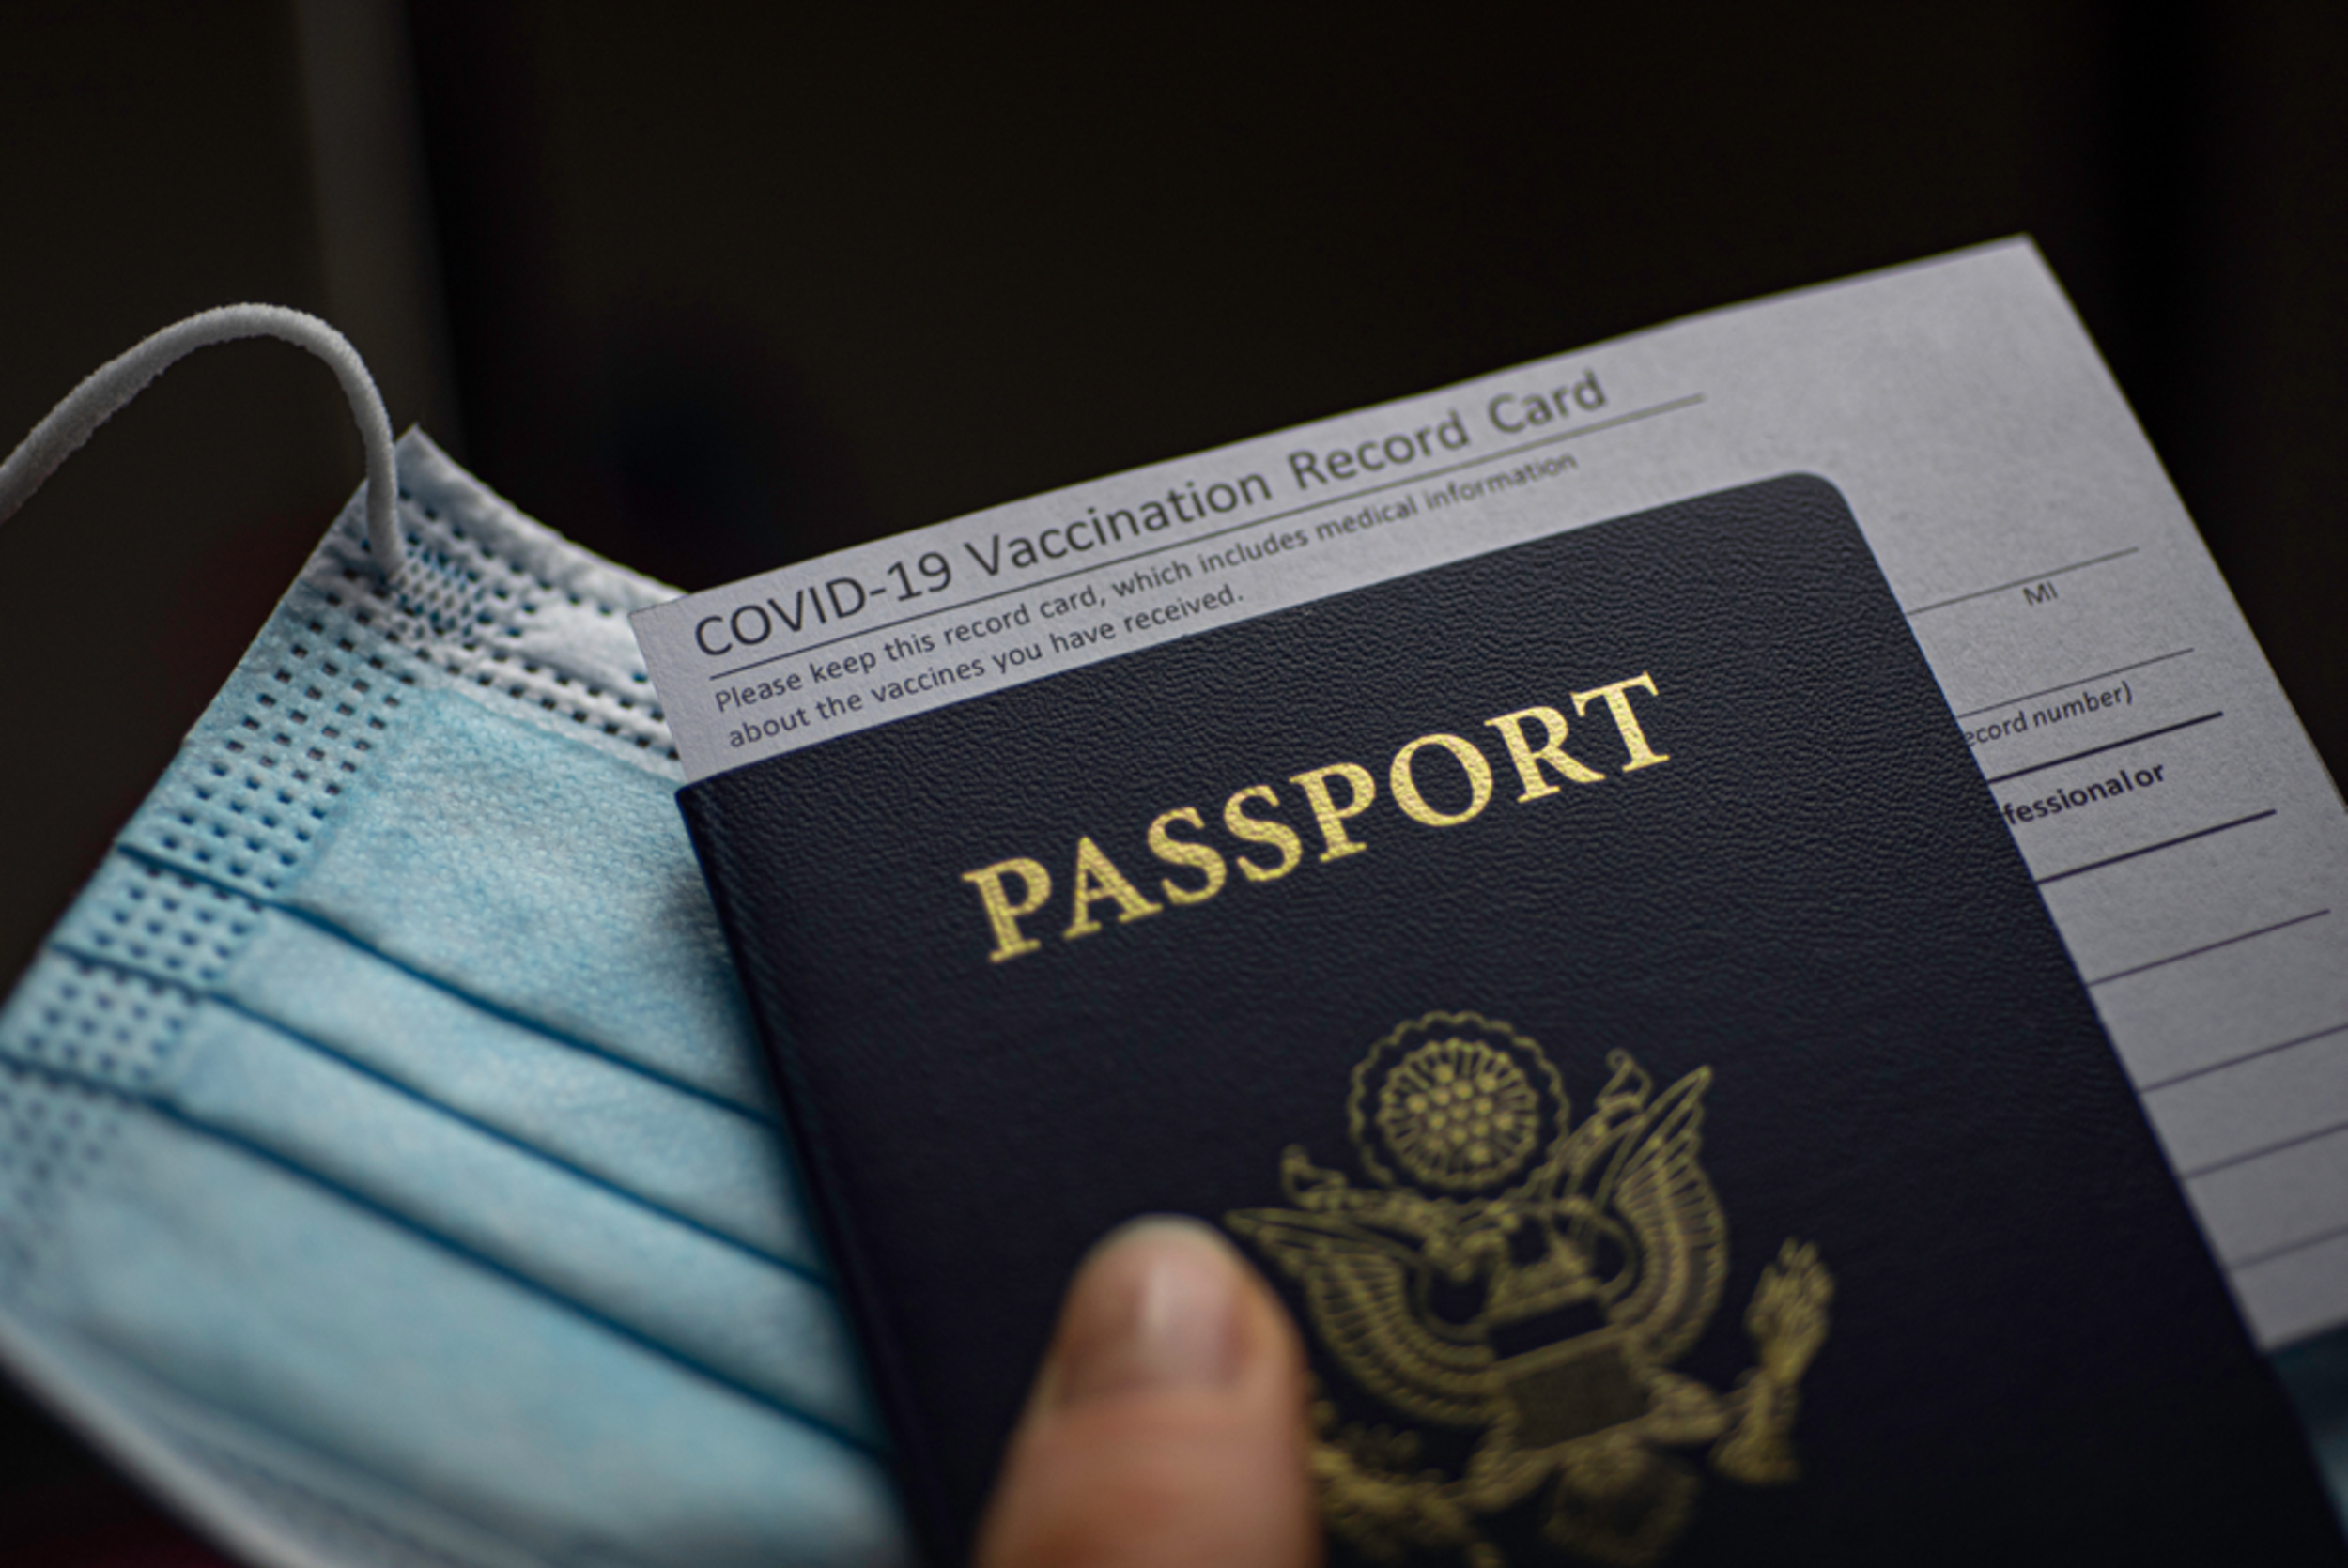 <p>Whether traveling domestically or internationally, always take photos of your driver's license, vaccine card, or passport. If something happens and those essential documents get lost, having photos of your identification can help you figure out a way home. </p><p><a href='https://www.msn.com/en-us/community/channel/vid-cj9pqbr0vn9in2b6ddcd8sfgpfq6x6utp44fssrv6mc2gtybw0us'>Did you enjoy this slideshow? Follow us on MSN to see more of our exclusive lifestyle content.</a></p>